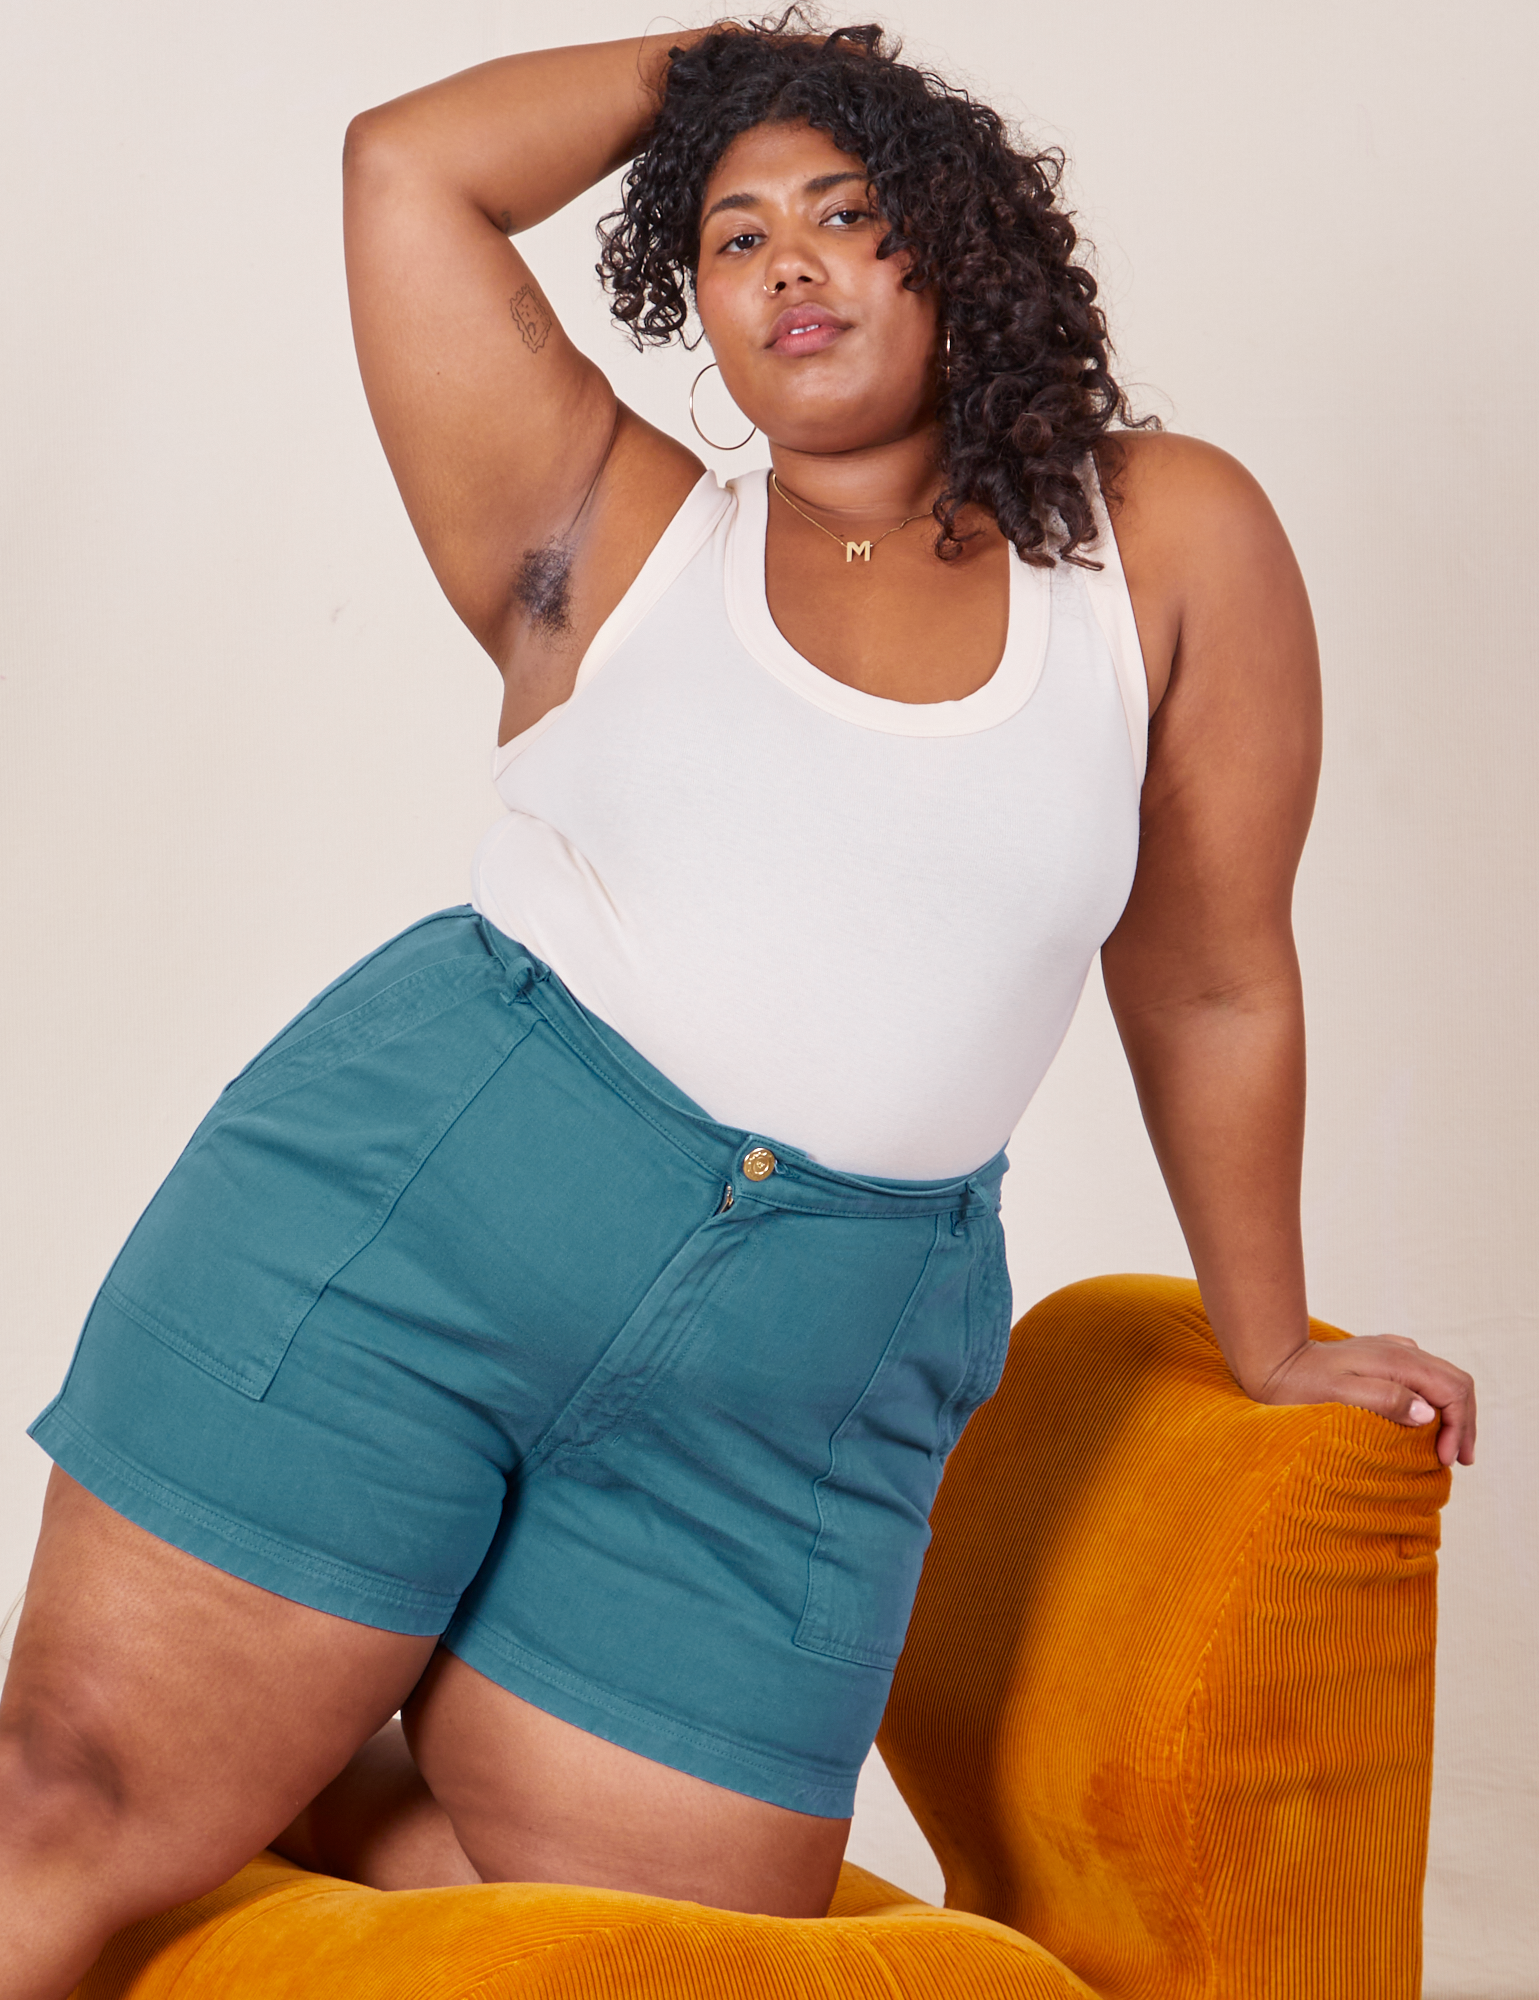 Morgan is 5’5” and wearing 1XL Classic Work Shorts in Marine Blue paired with a Tank Top in vintage tee off-white